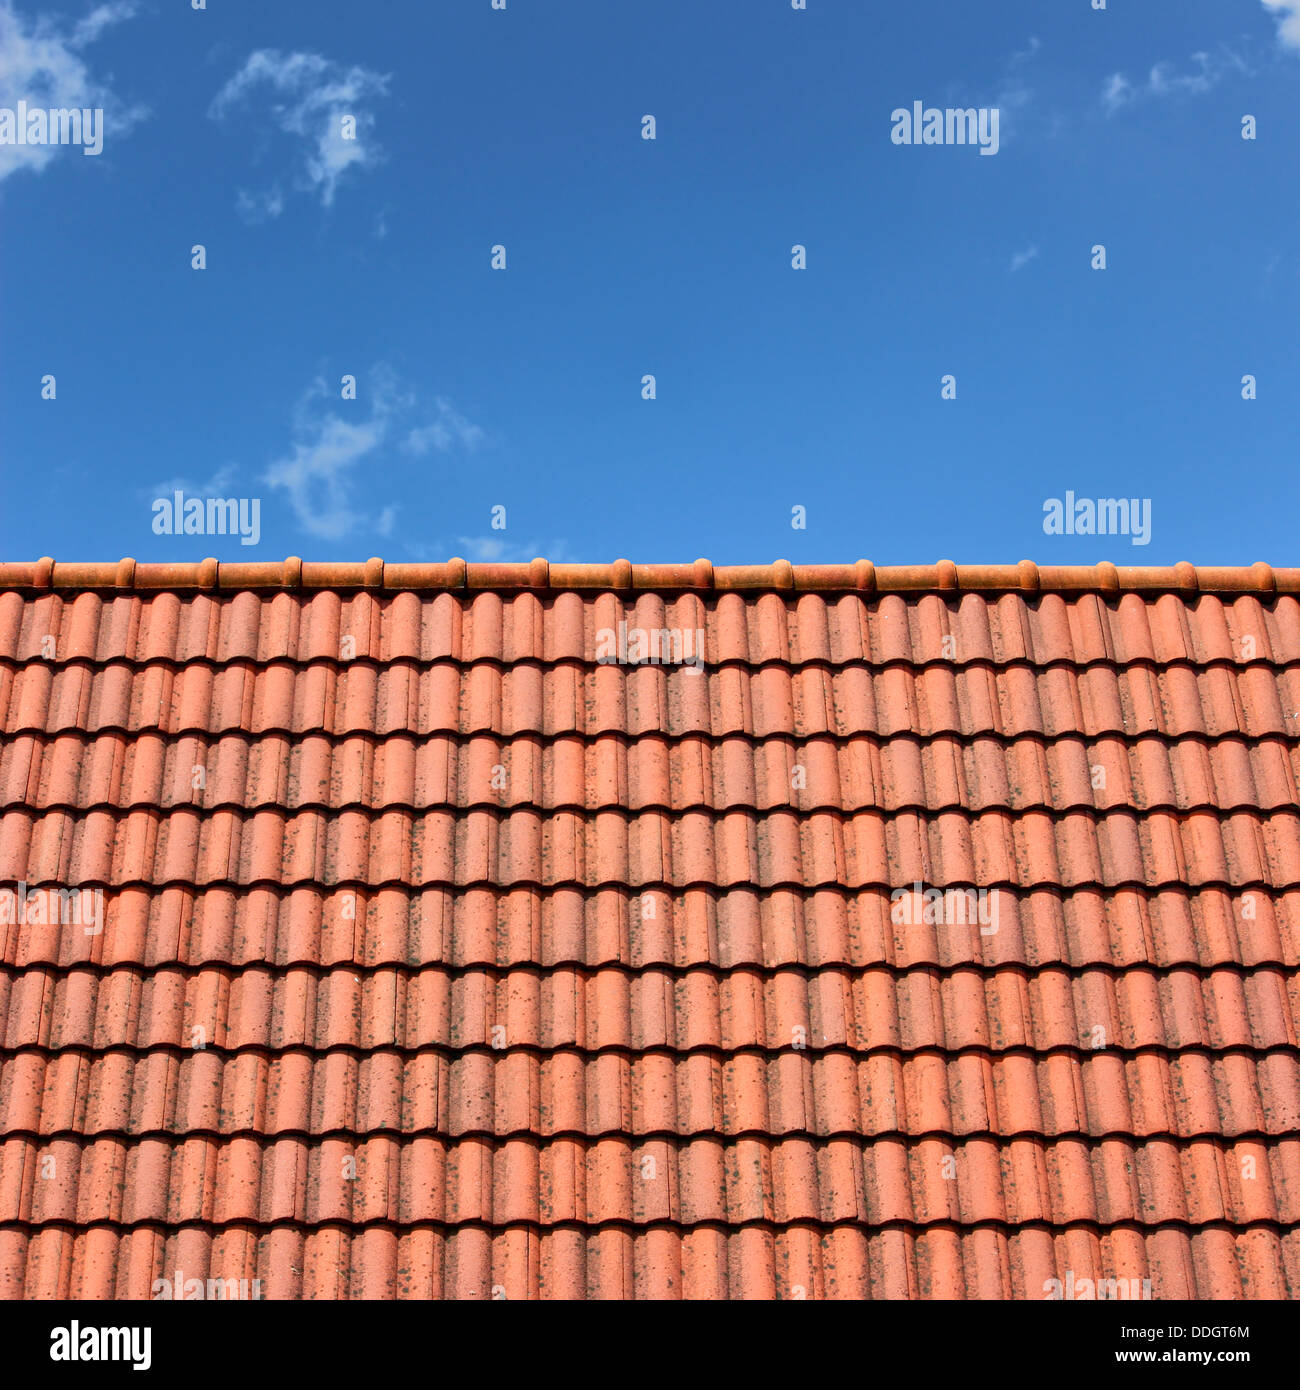 A Roof Top with Red Tiles Stock Photo